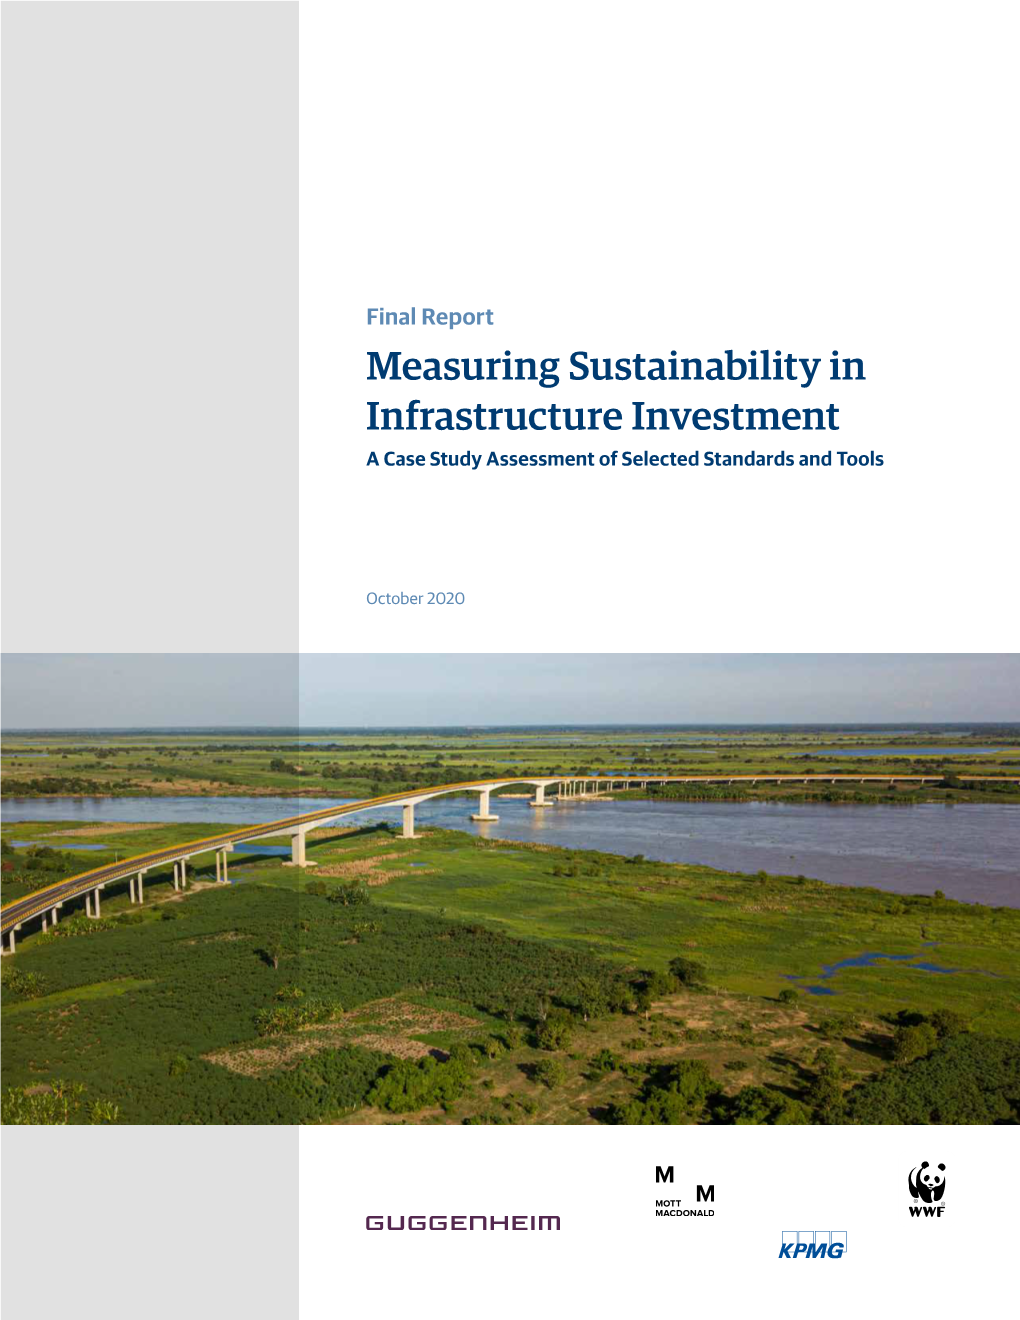 Measuring Sustainability in Infrastructure Investment a Case Study Assessment of Selected Standards and Tools